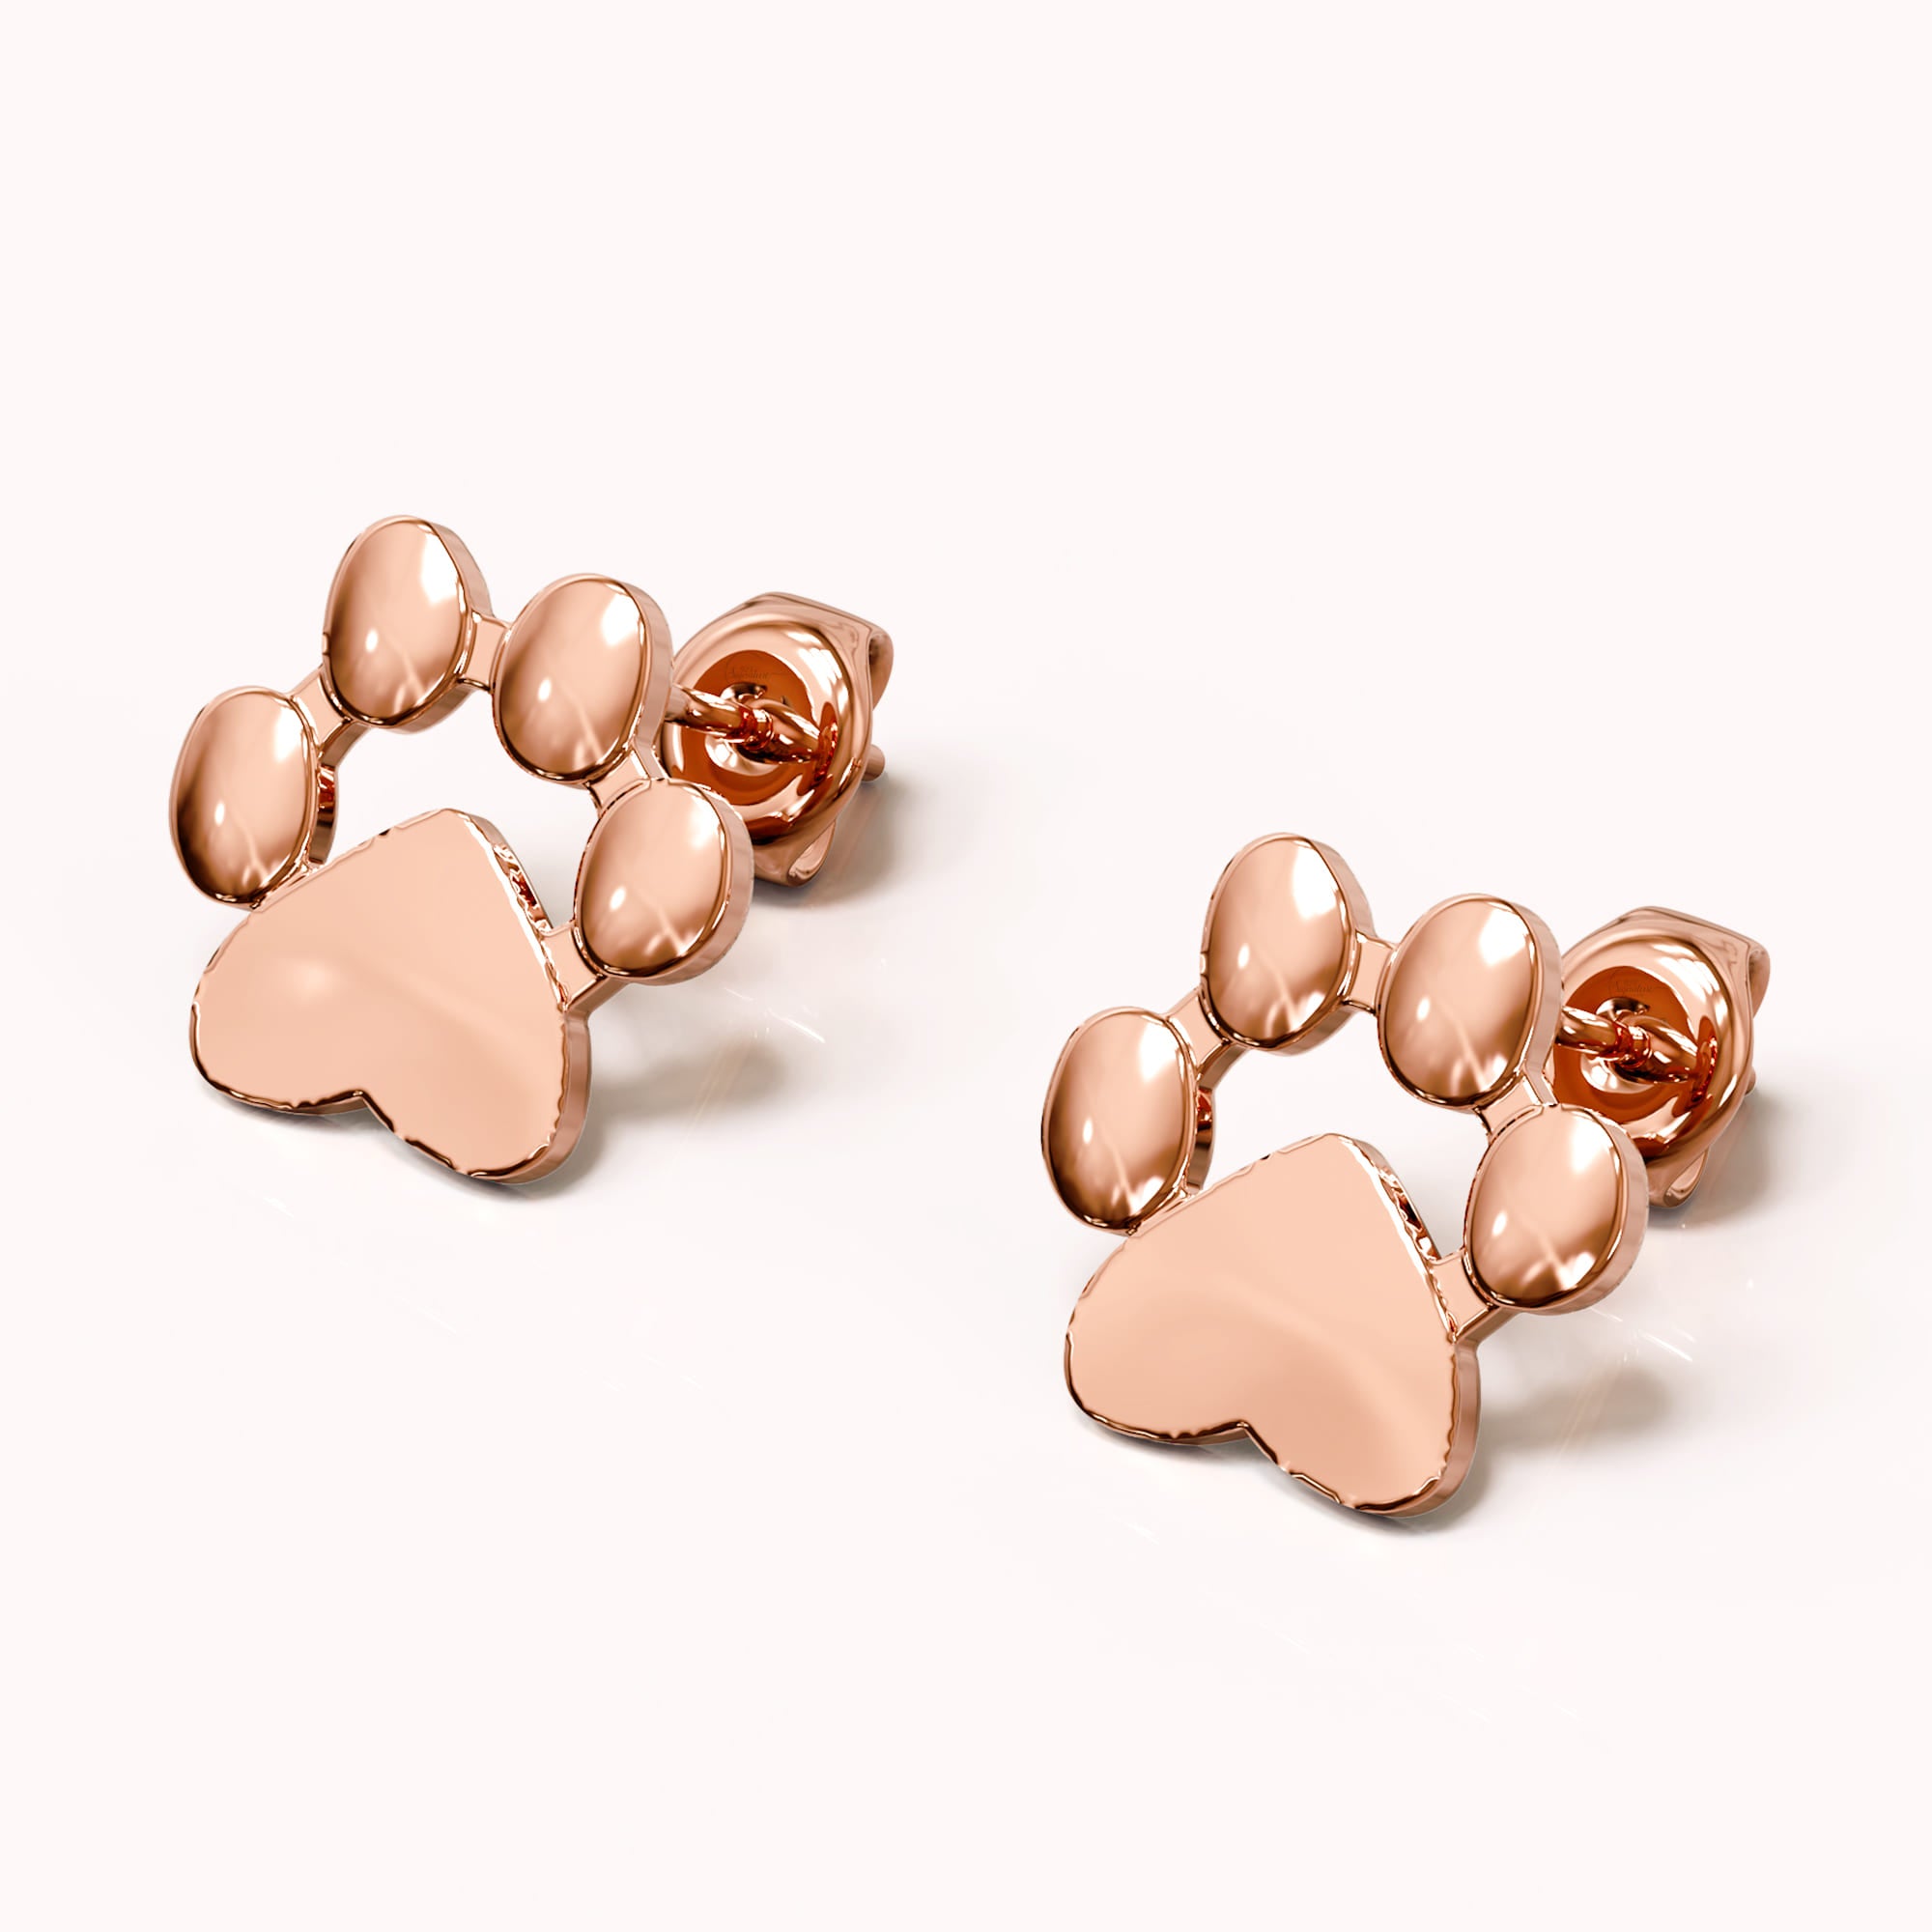 Solid 925 Sterling Silver Animal Paw Print Rose Gold Stud Earrings